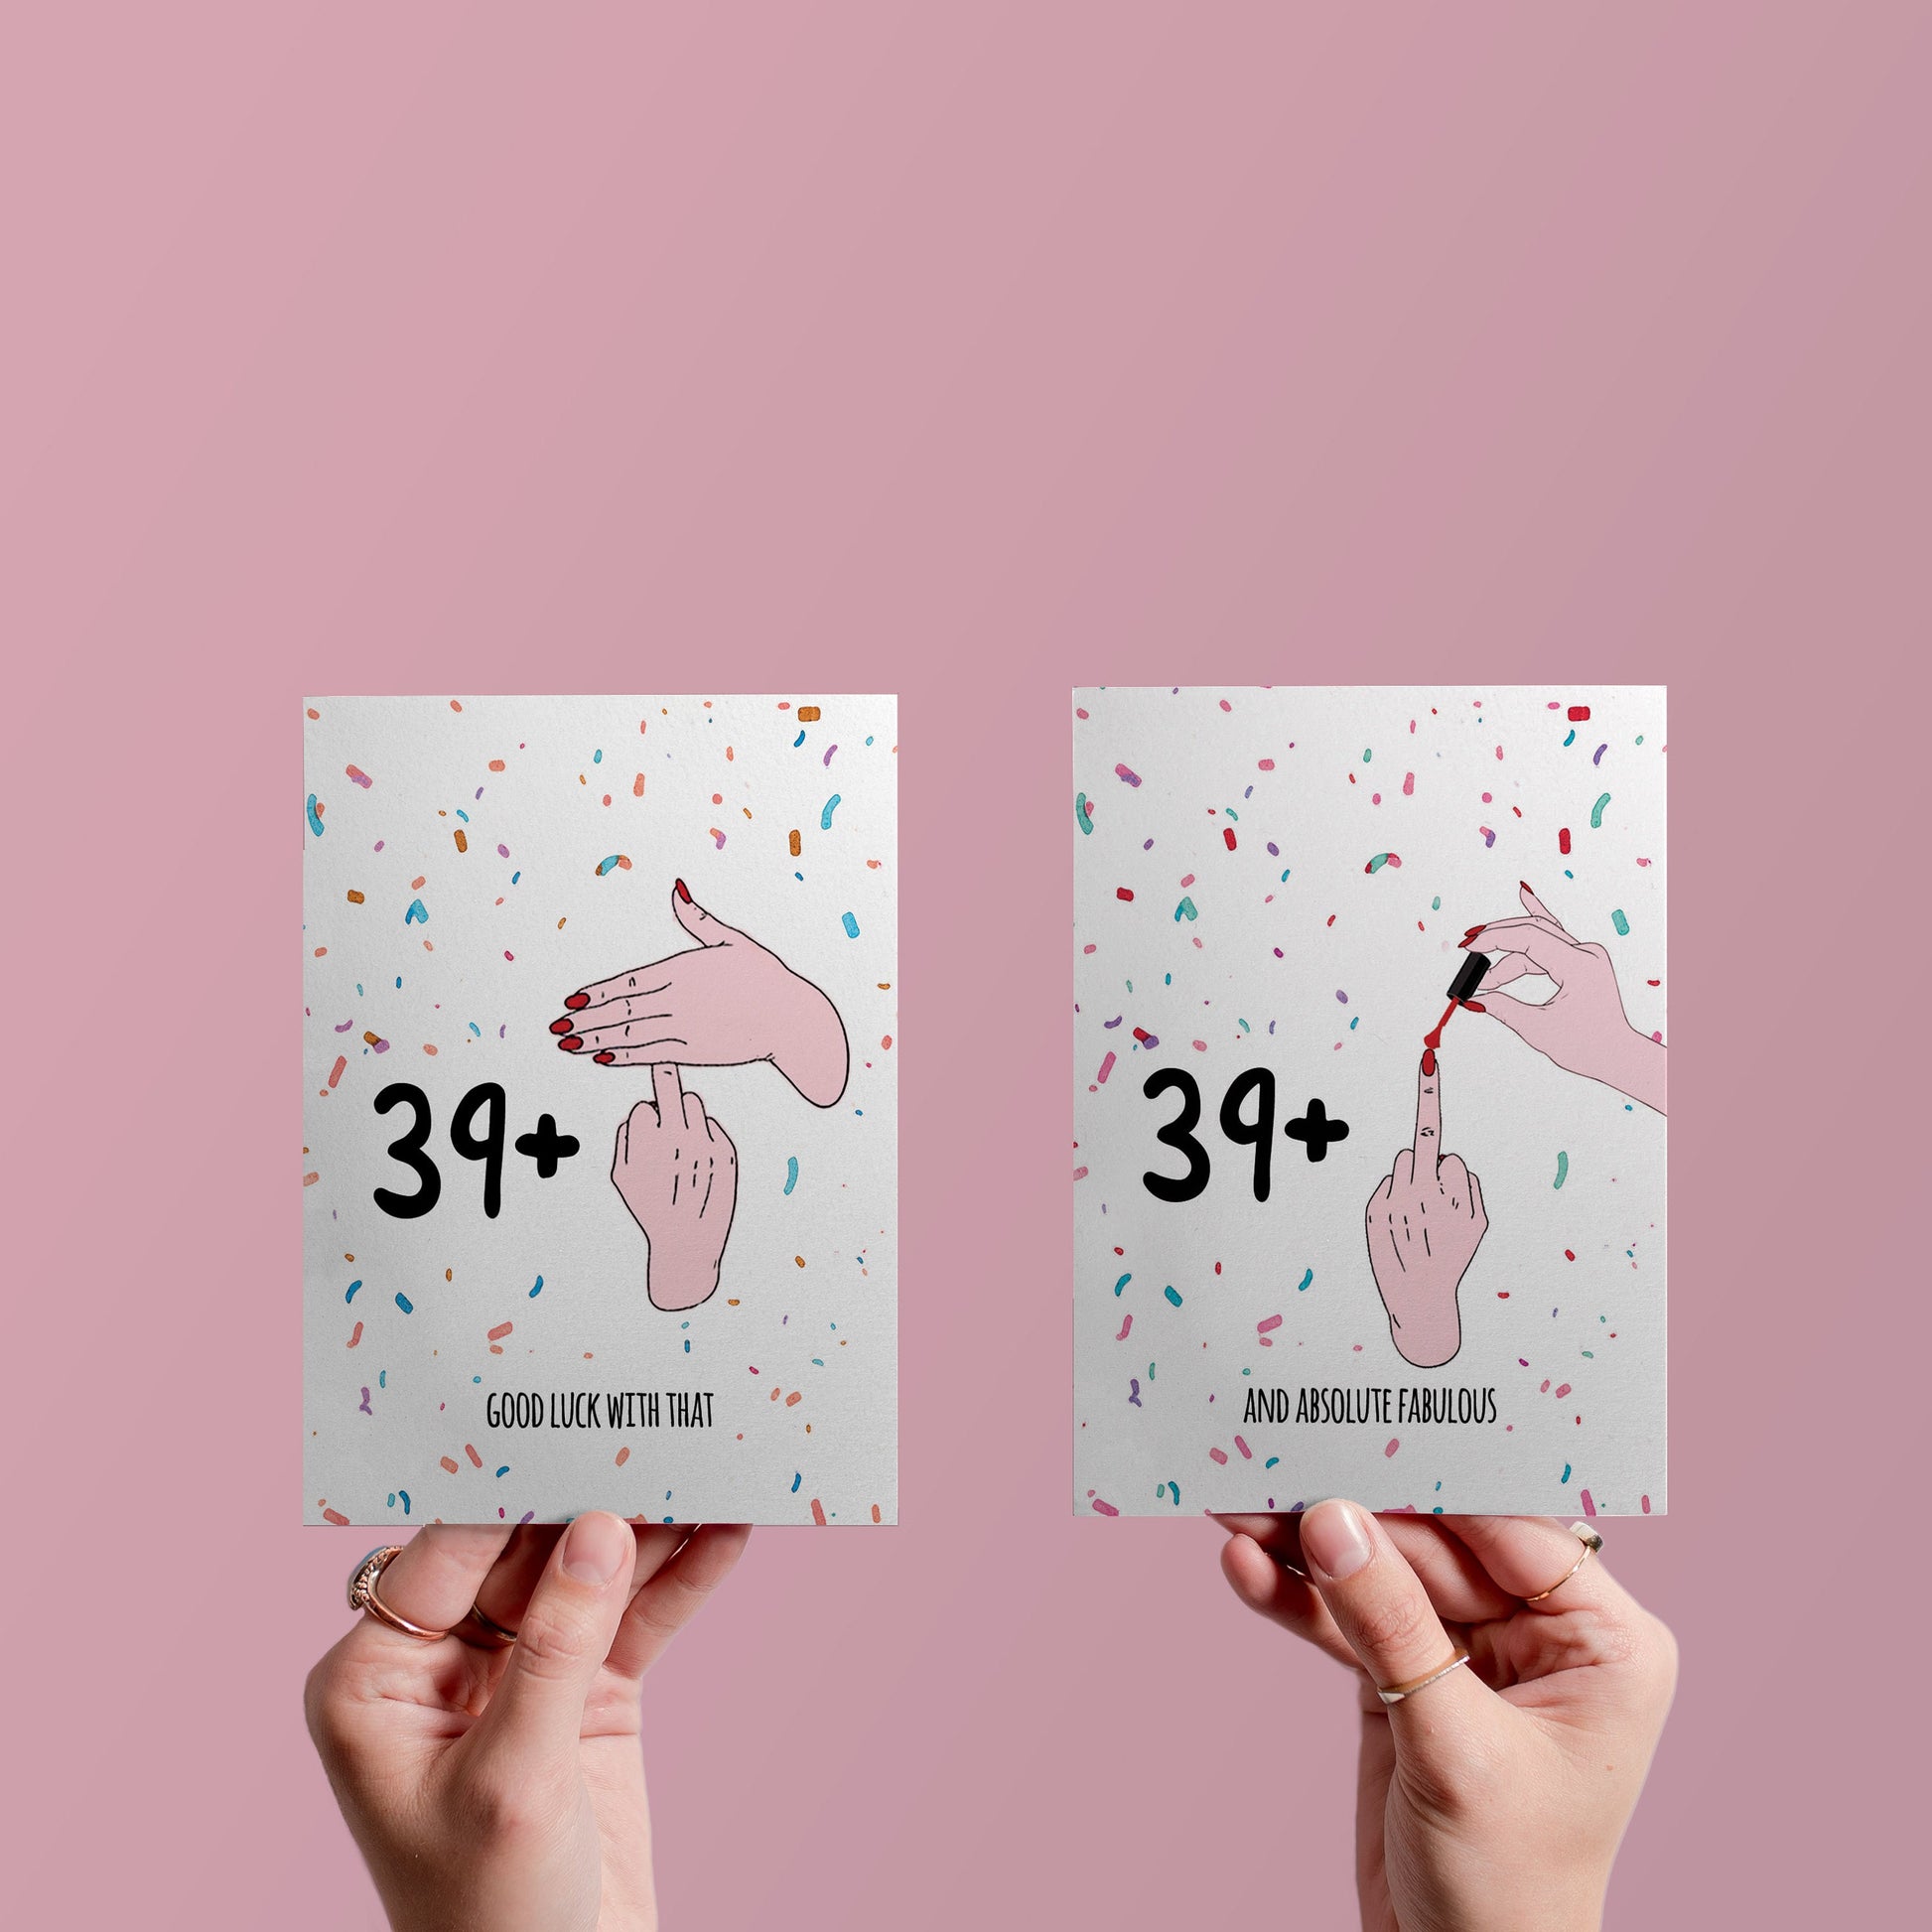 Offensive 40th birthday card, Funny Birthday Cards For Best Friends, Rude Forty Bday Cards For Her, Happy Birthday Of 40 Middle Finger Swear